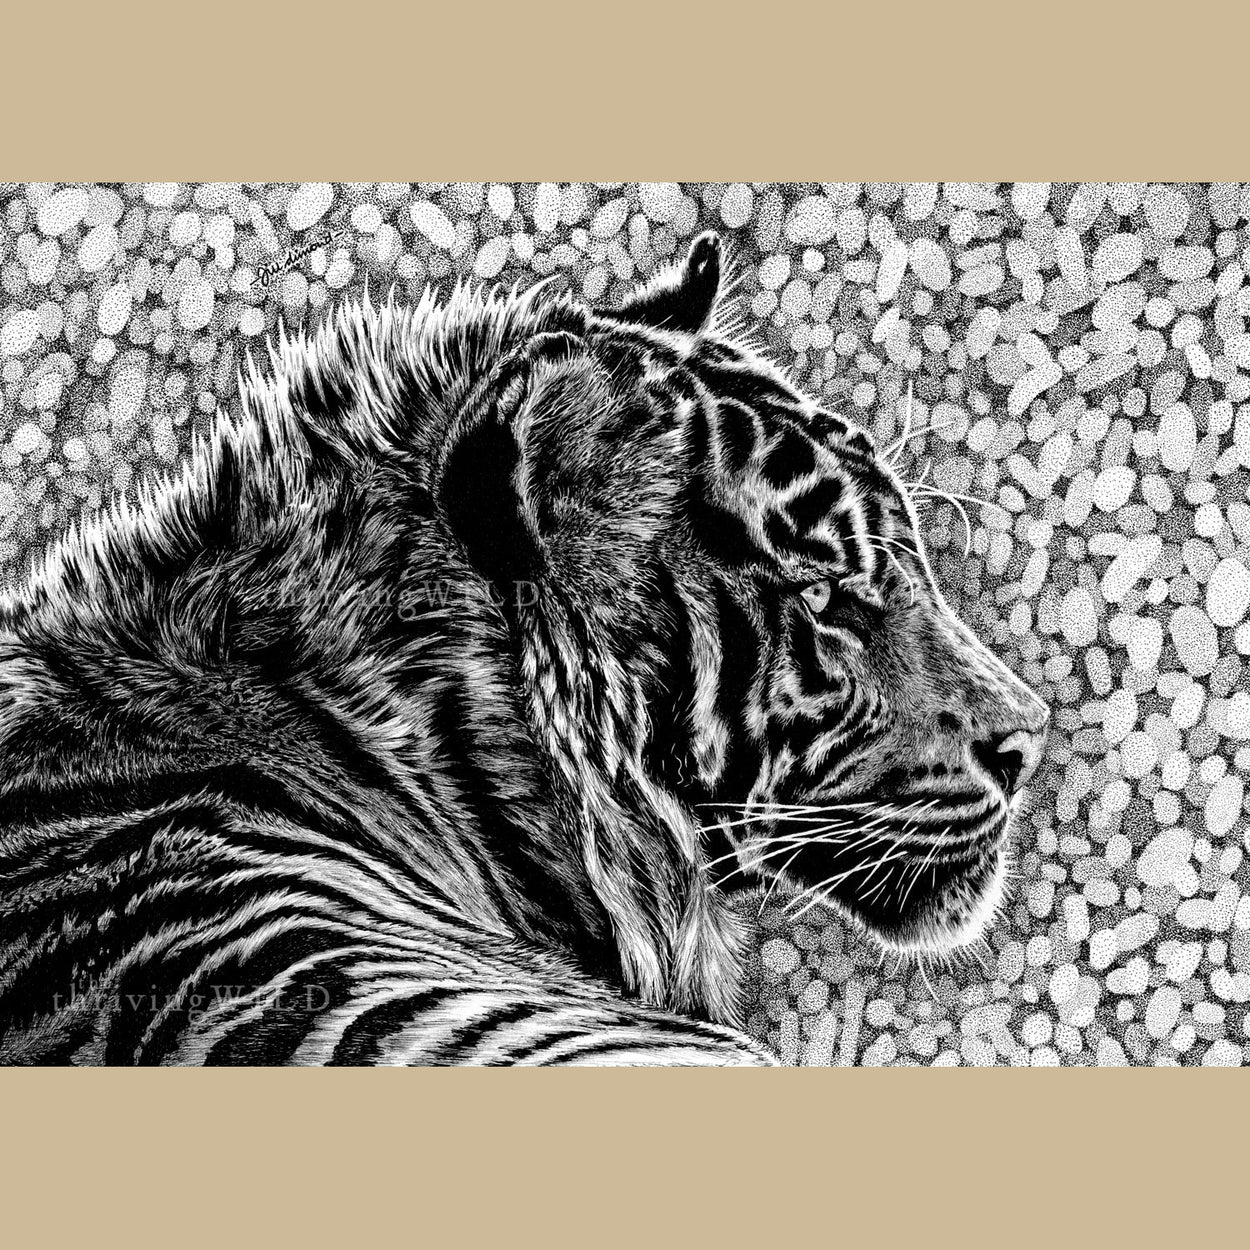 Tiger Pen Drawing - The Thriving Wild